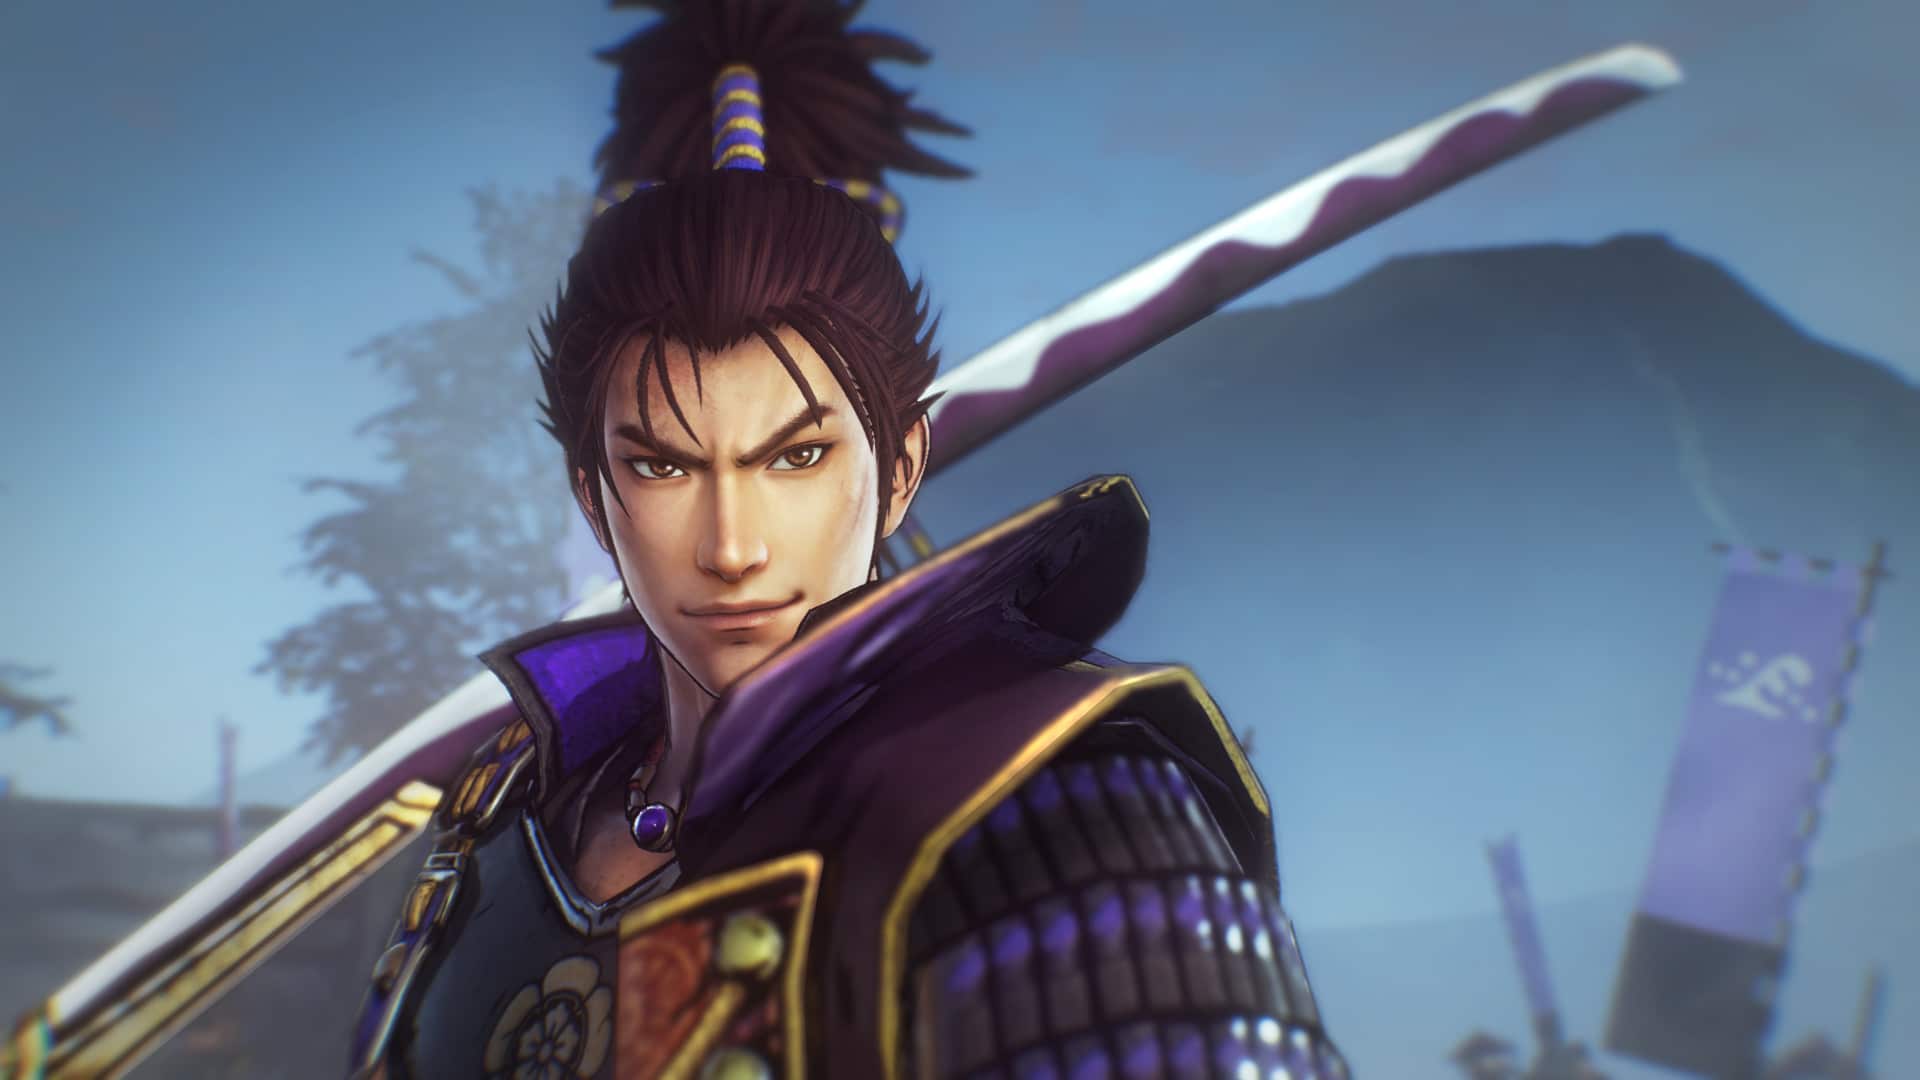 Samurai Warriors 5 to Launch Free Demo Next Week on PS4, Xbox One, Switch, and PC